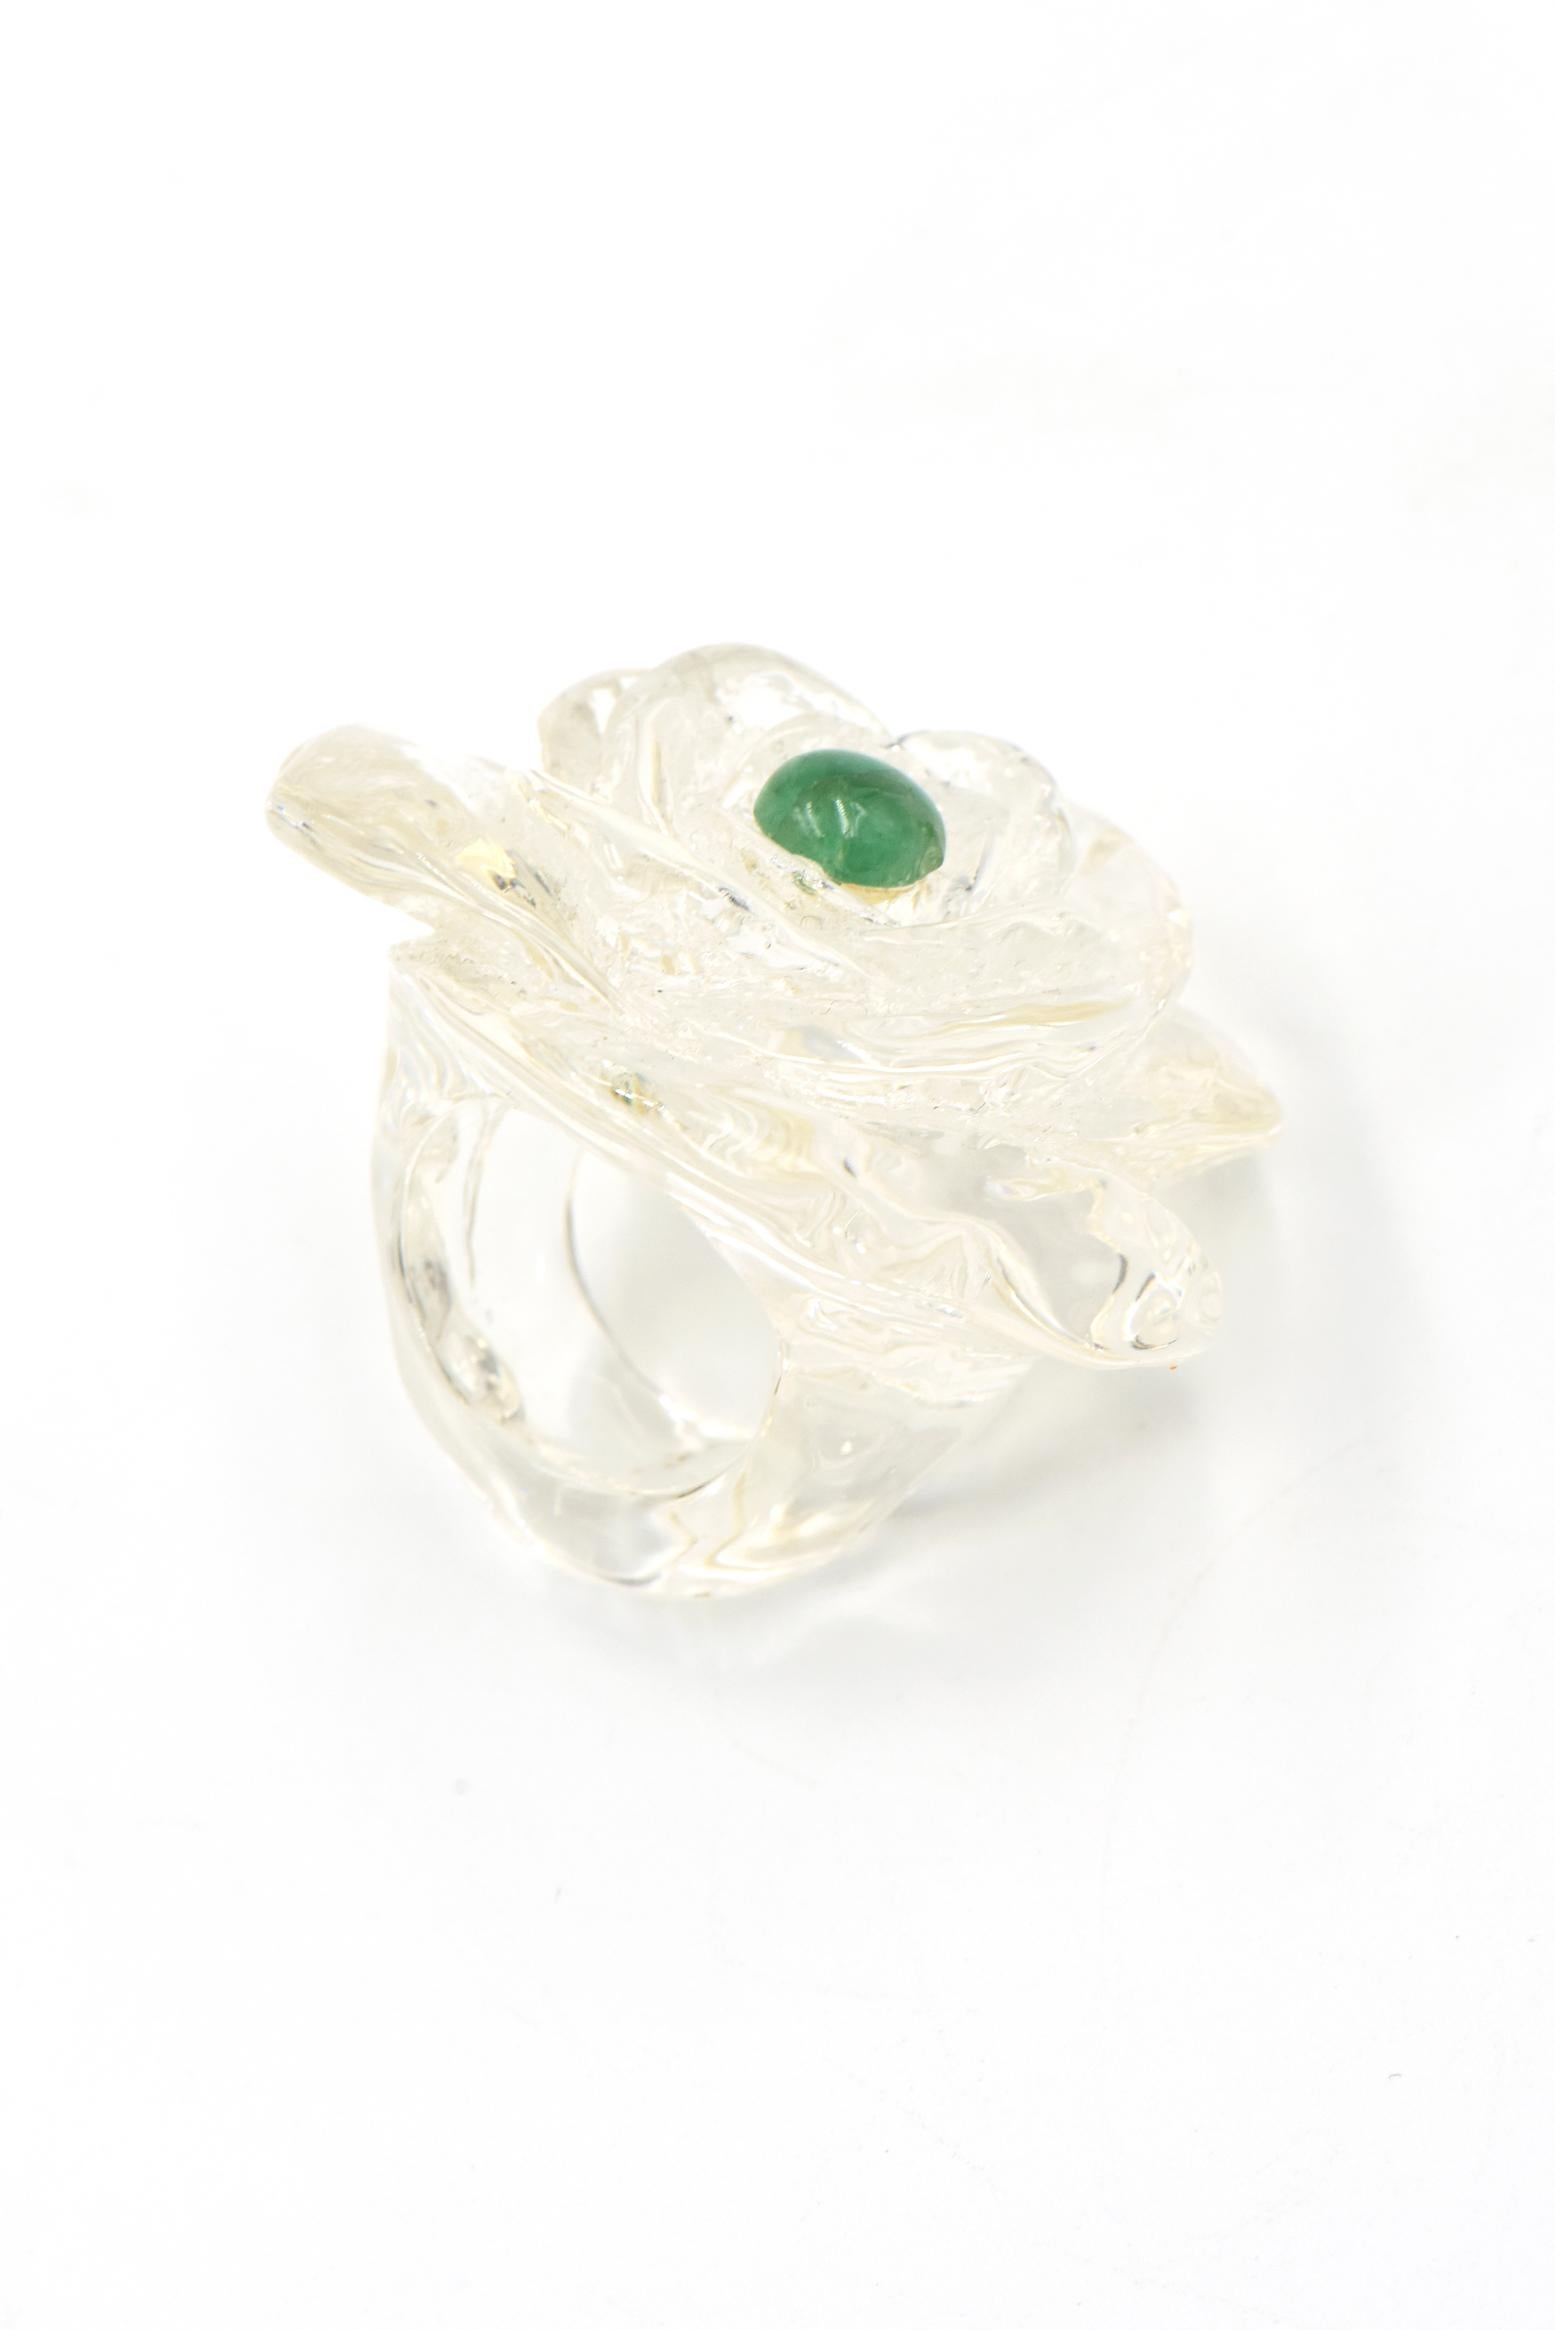 Clear acrylic flower ring presenting a emerald stone in the center. U.S. size: 7.5